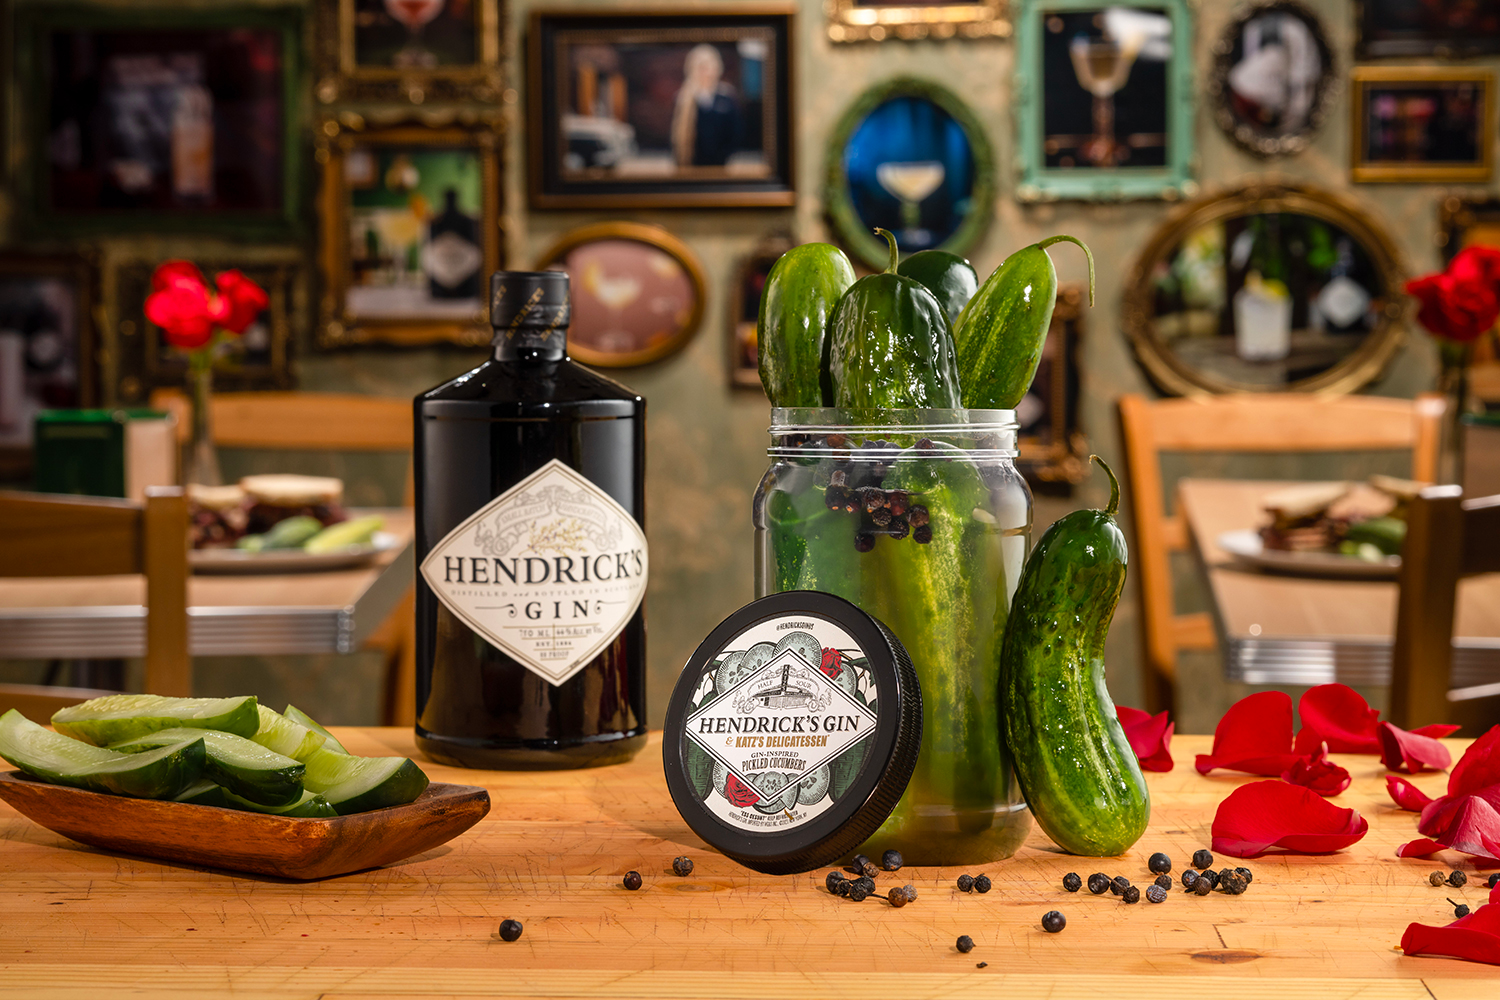 Pickled cucumbers inspired by Hendrick's and Katz's Delicatessen gin